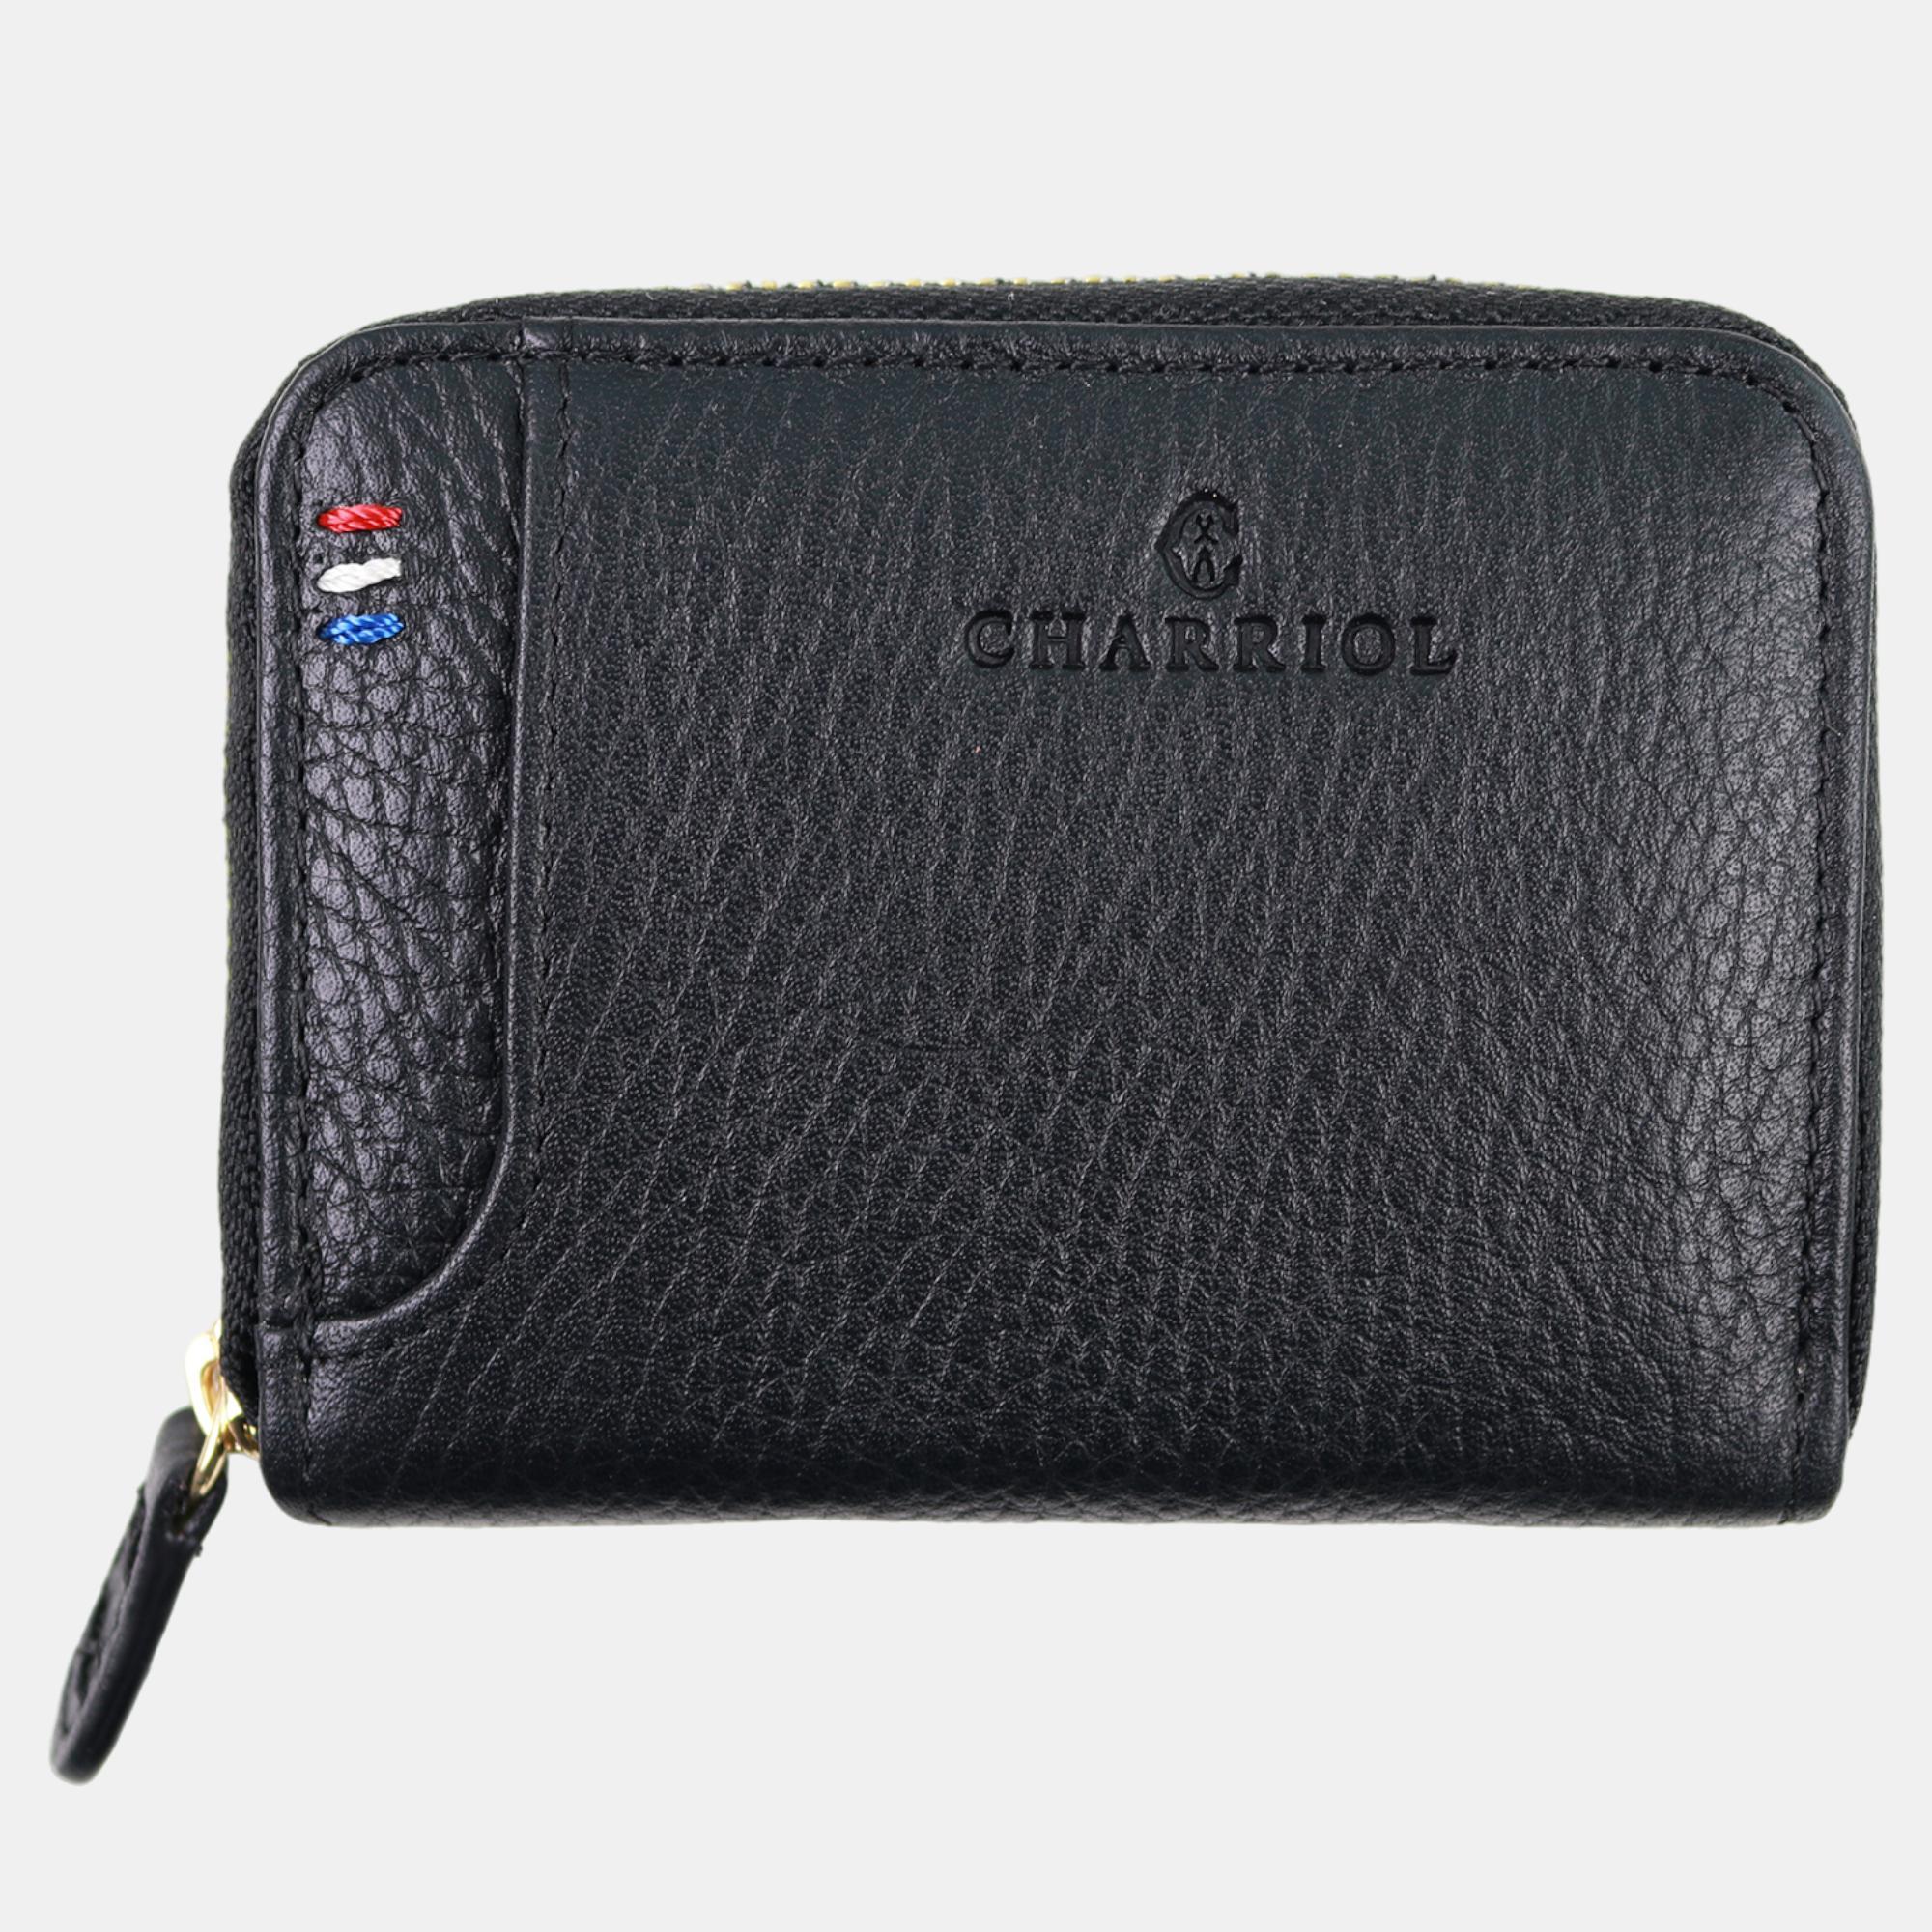 Pre-owned Charriol Leather Card Holders In Black